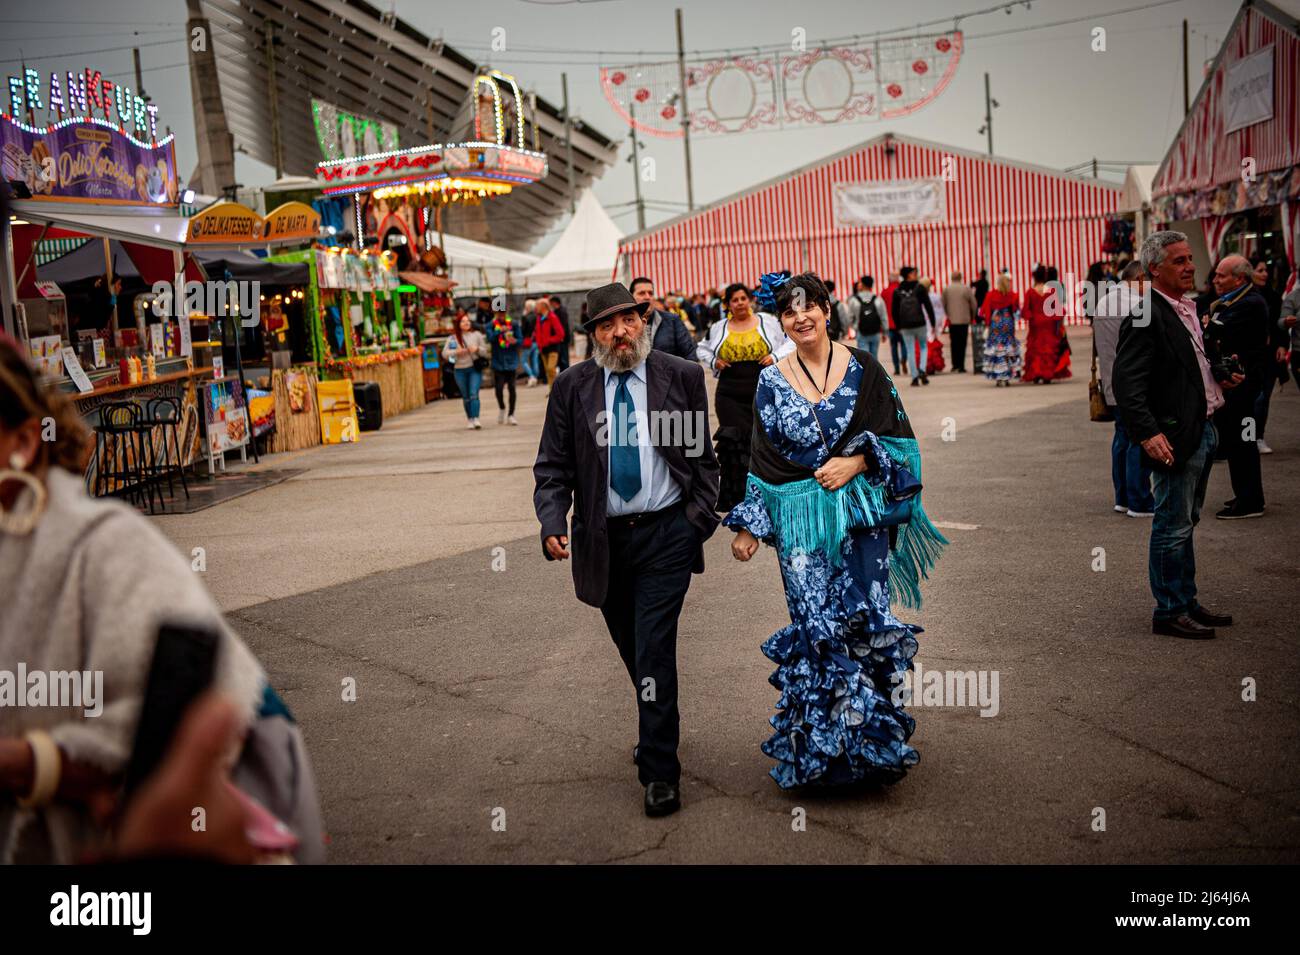 Barcelona, Spain. April 27, 2022, Barcelona, Spain:  A woman wearing in traditional Andalusian dress walks along La Feria de Abril (April Fair) held in Barcelona's Forum Park. The Feria de Abril in Barcelona is a folkloric festival of Andalusian roots that has been celebrated in Catalonia for almost 50 years. Credit: Jordi Boixareu/Alamy Live News Credit:  Jordi Boixareu/Alamy Live News Stock Photo